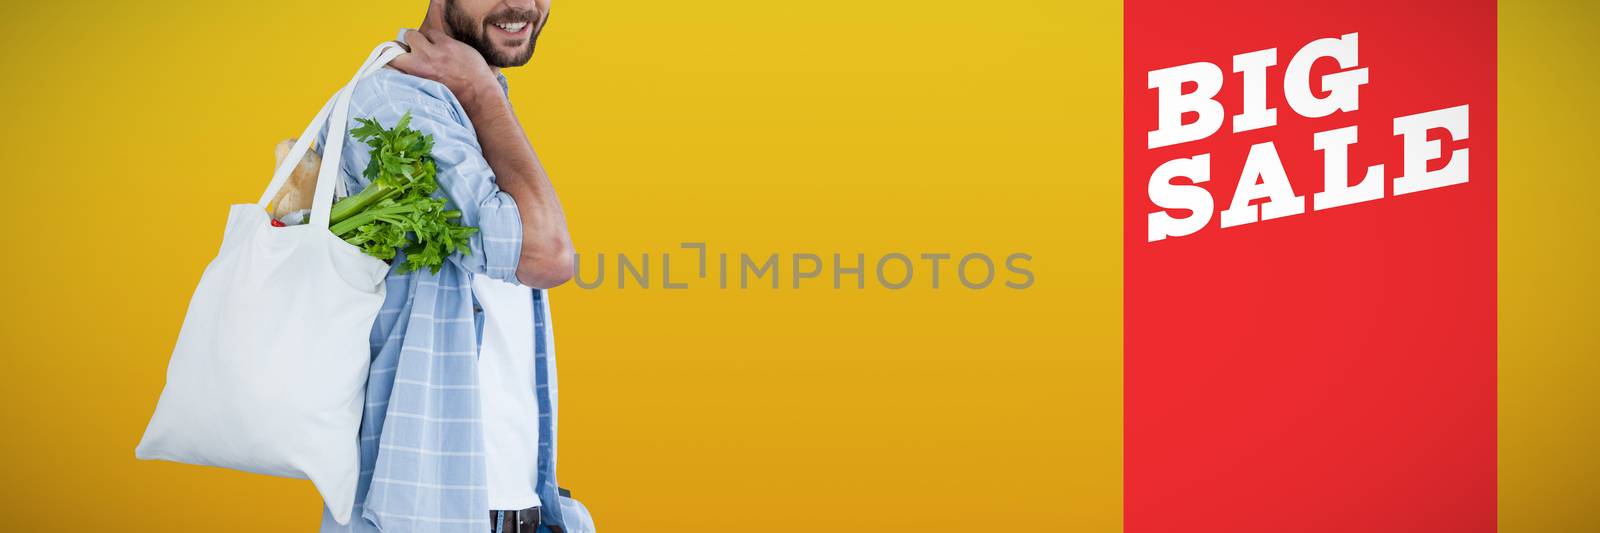 Portrait of man carrying vegetables in shopping bag against abstract mustard background